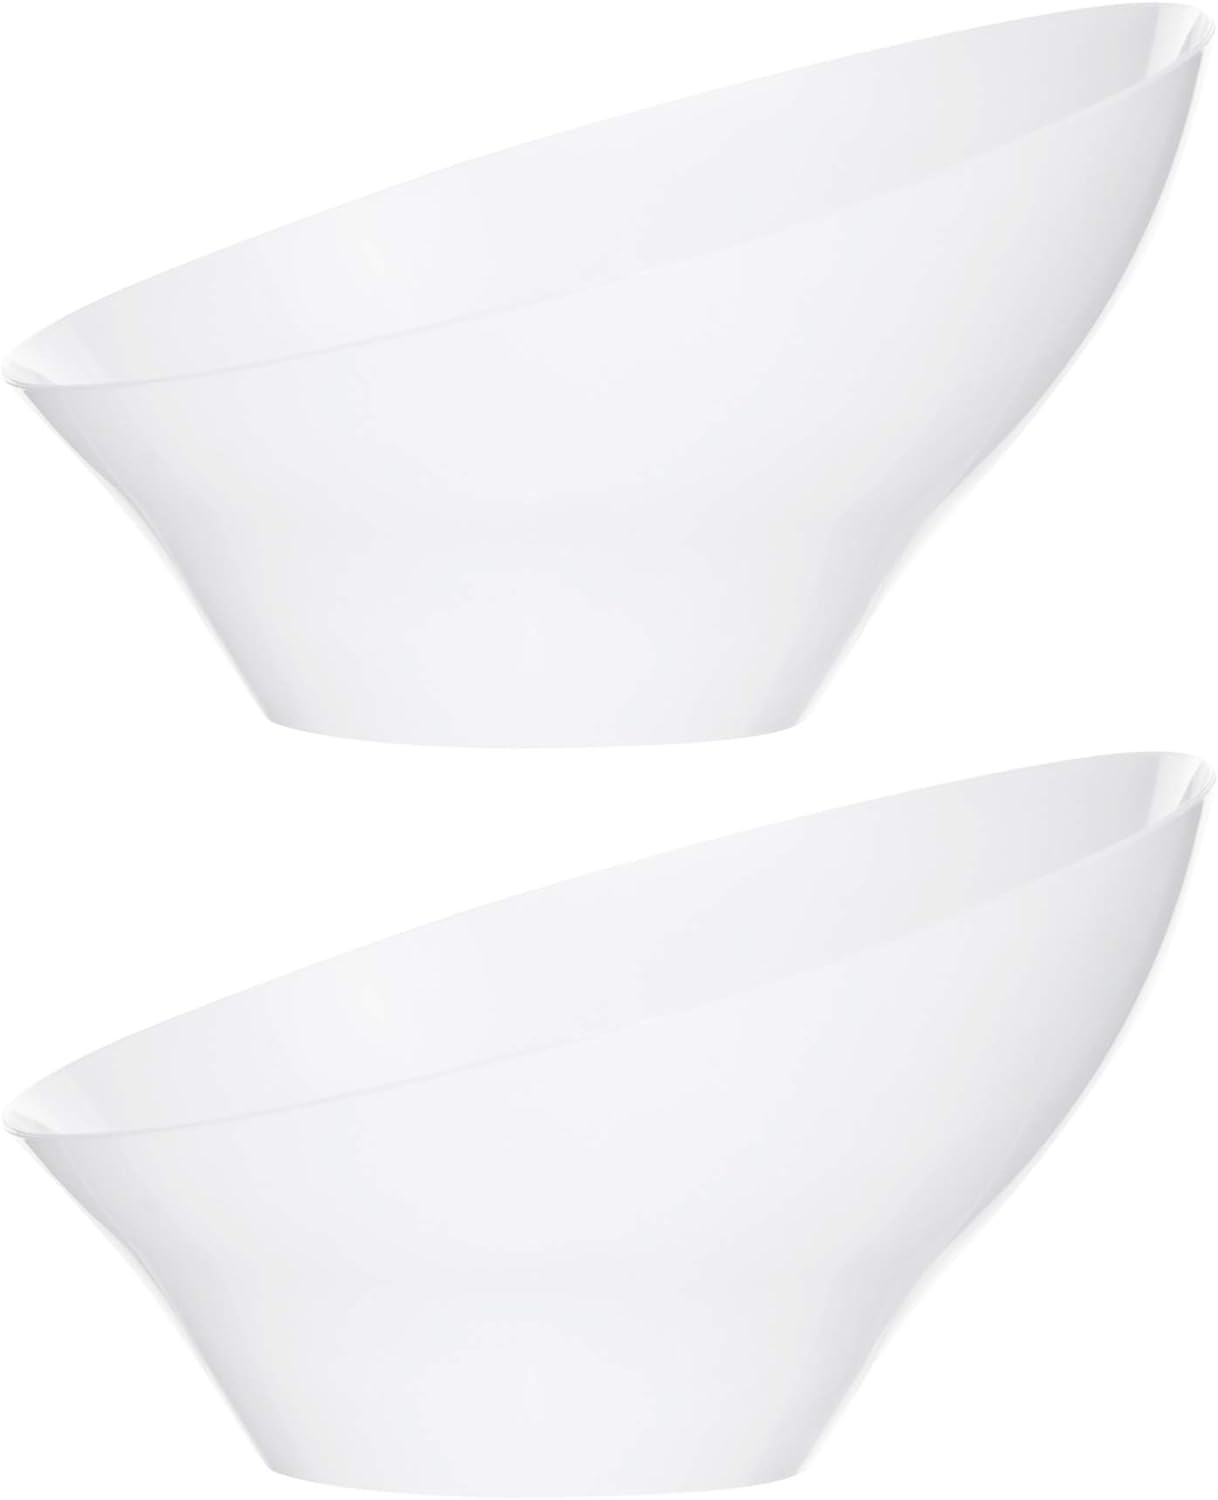 PLASTICPRO Disposable Angled Plastic Bowls Round Medium Serving Bowl, Elegant for Party', Snack, or Salad Bowl, White, Pack of 4